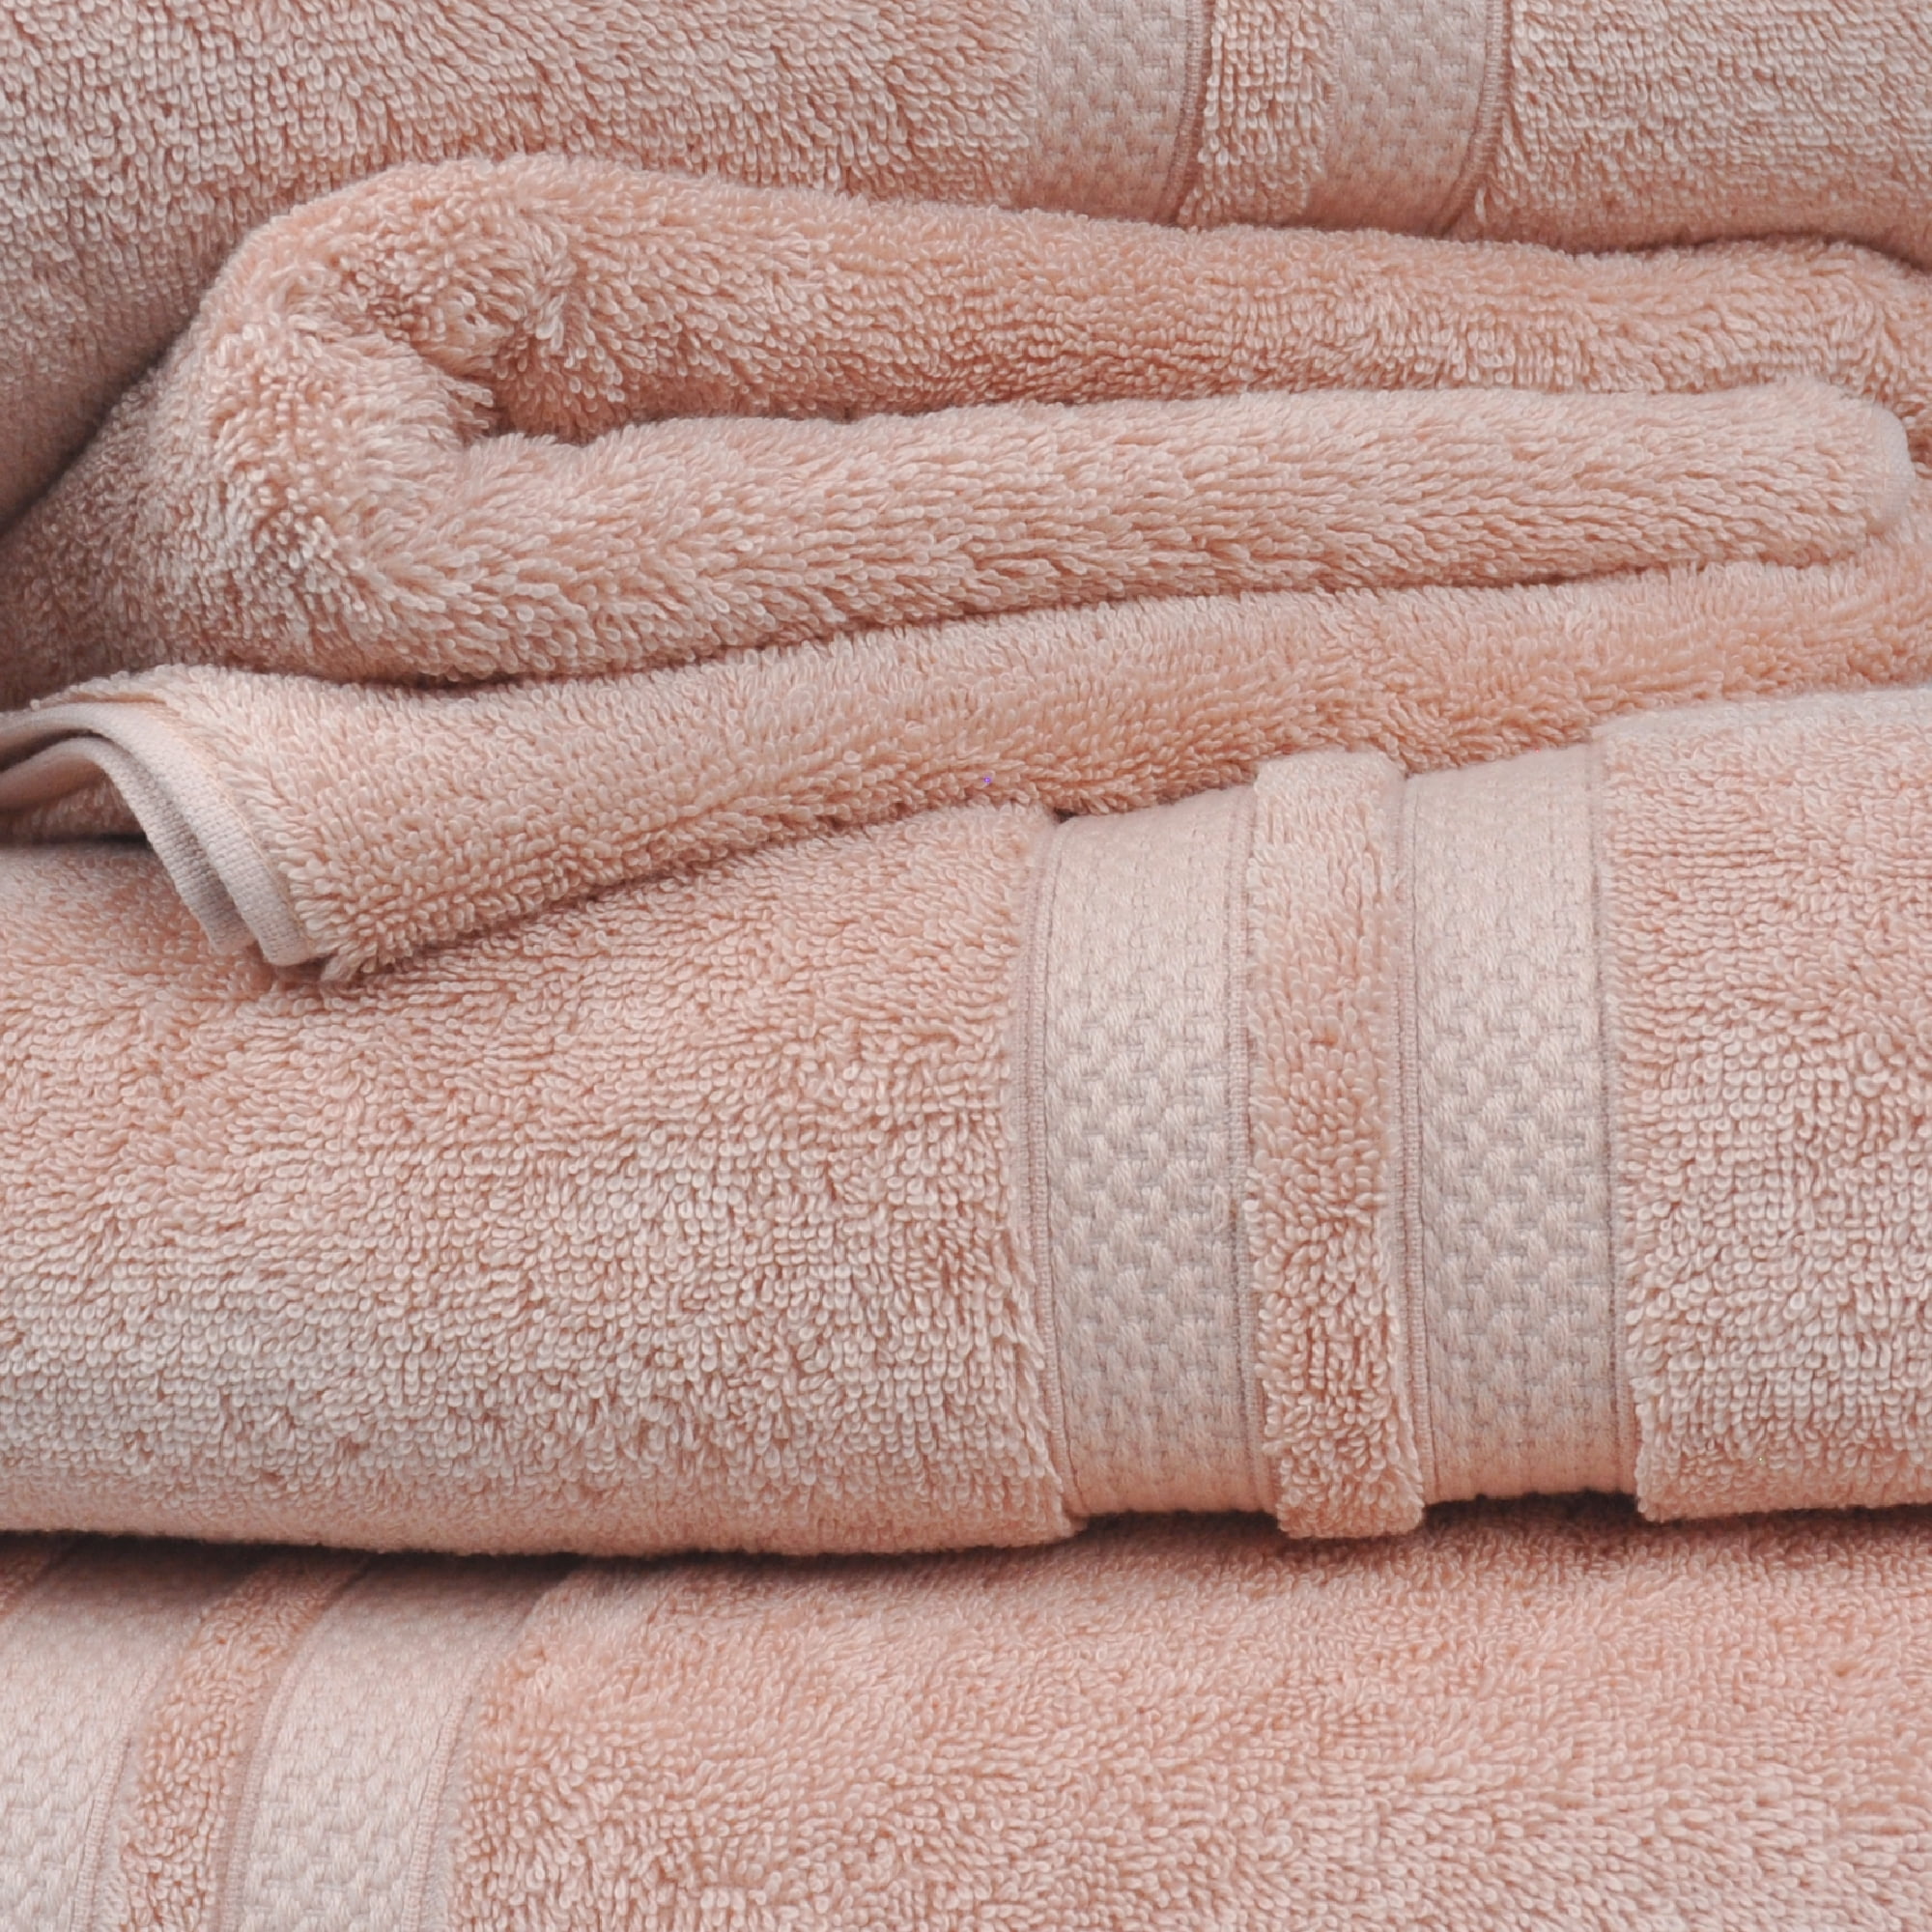 Thick Dusty Pink Bath Towels. Egyptian Cotton Bathroom Towels. 